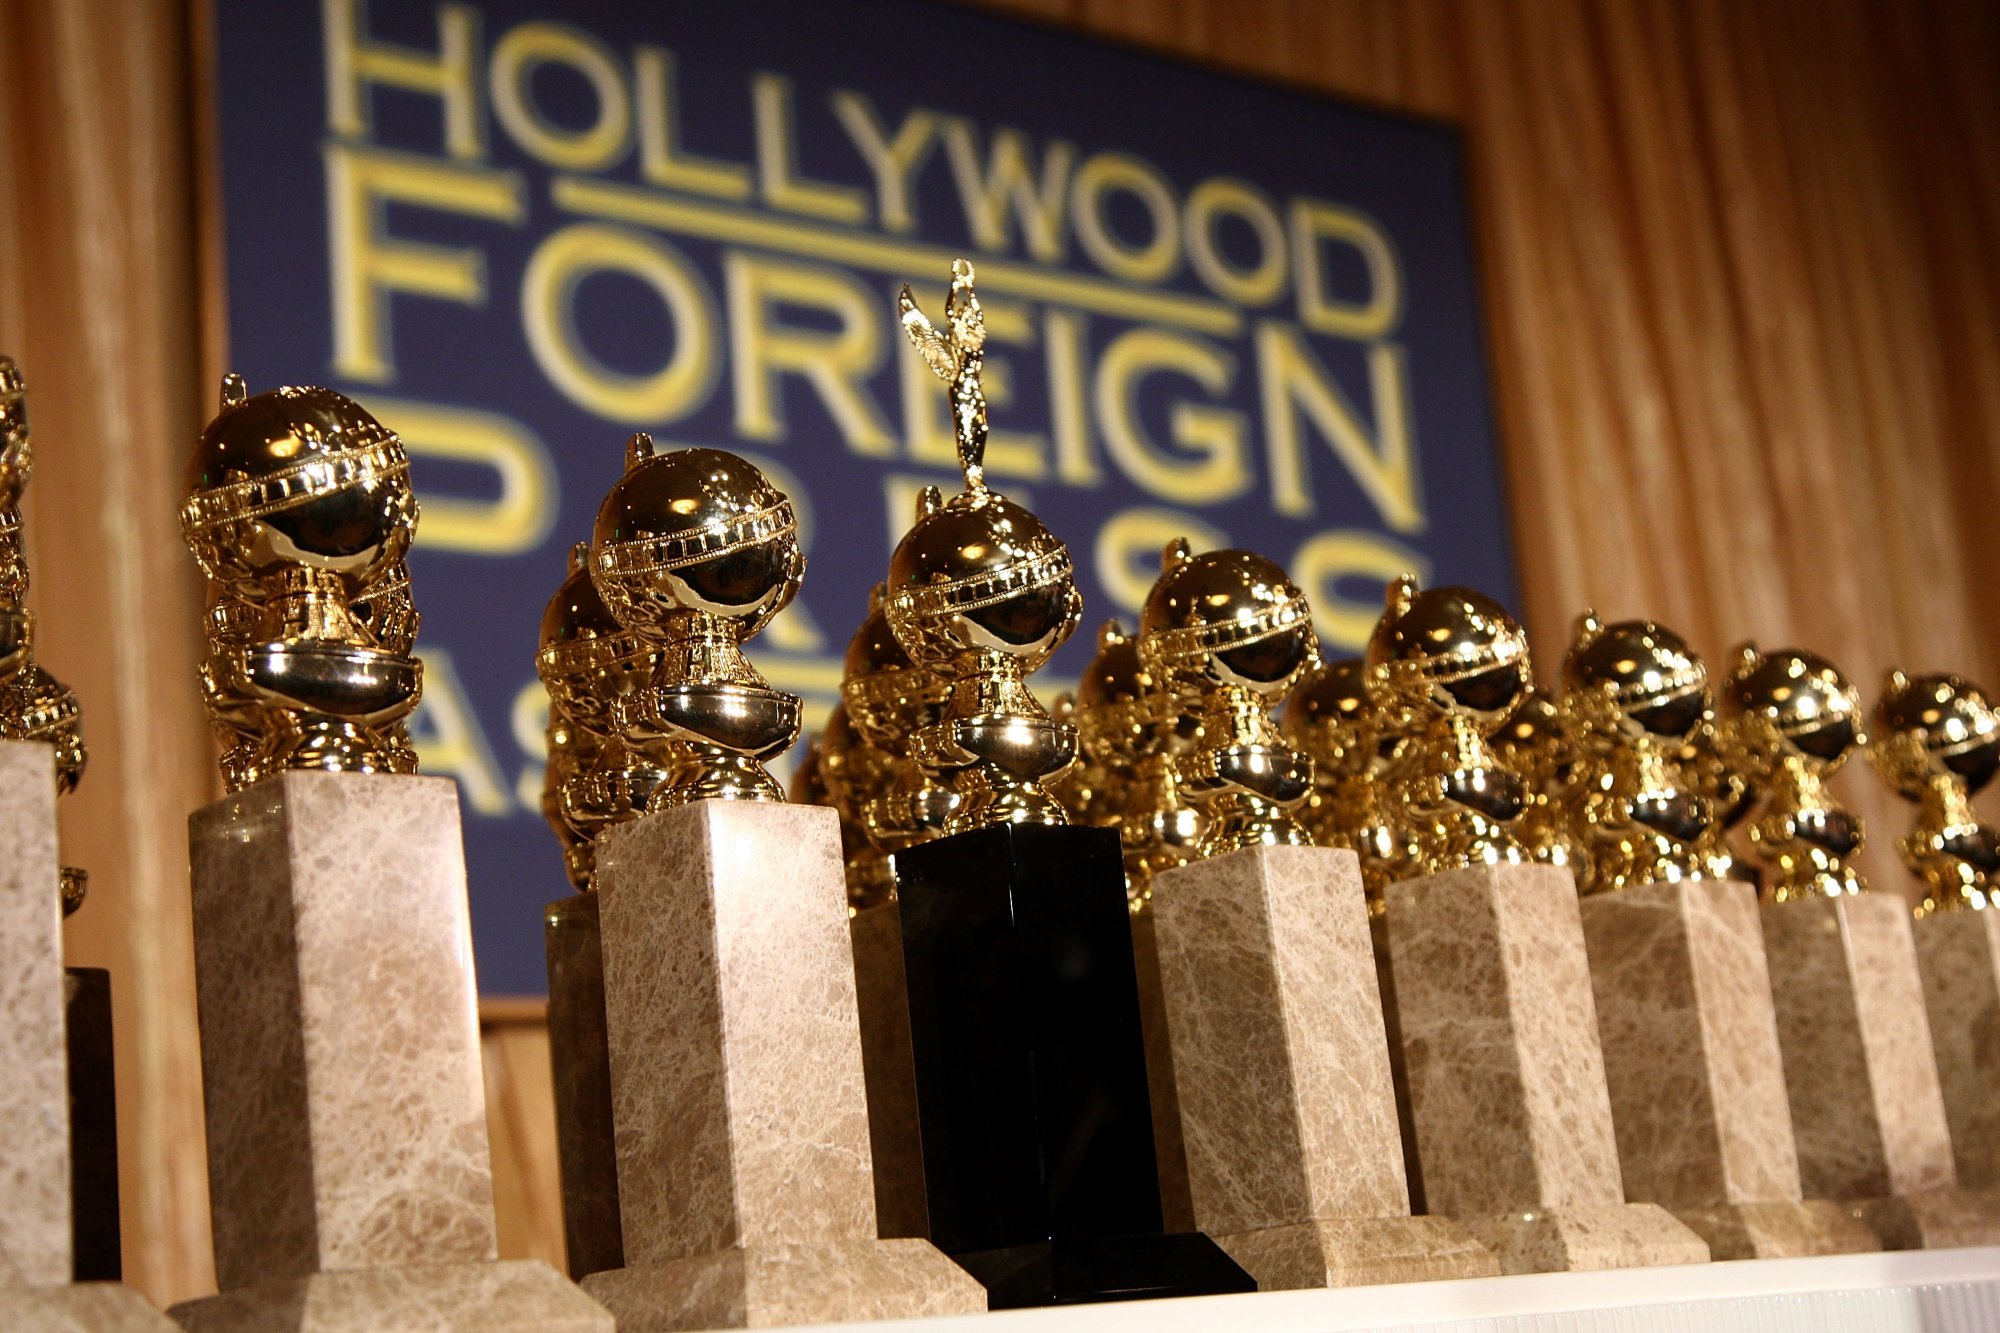 Golden Globes 2022 statues in front of the Hollywood Foreign Press Association logo